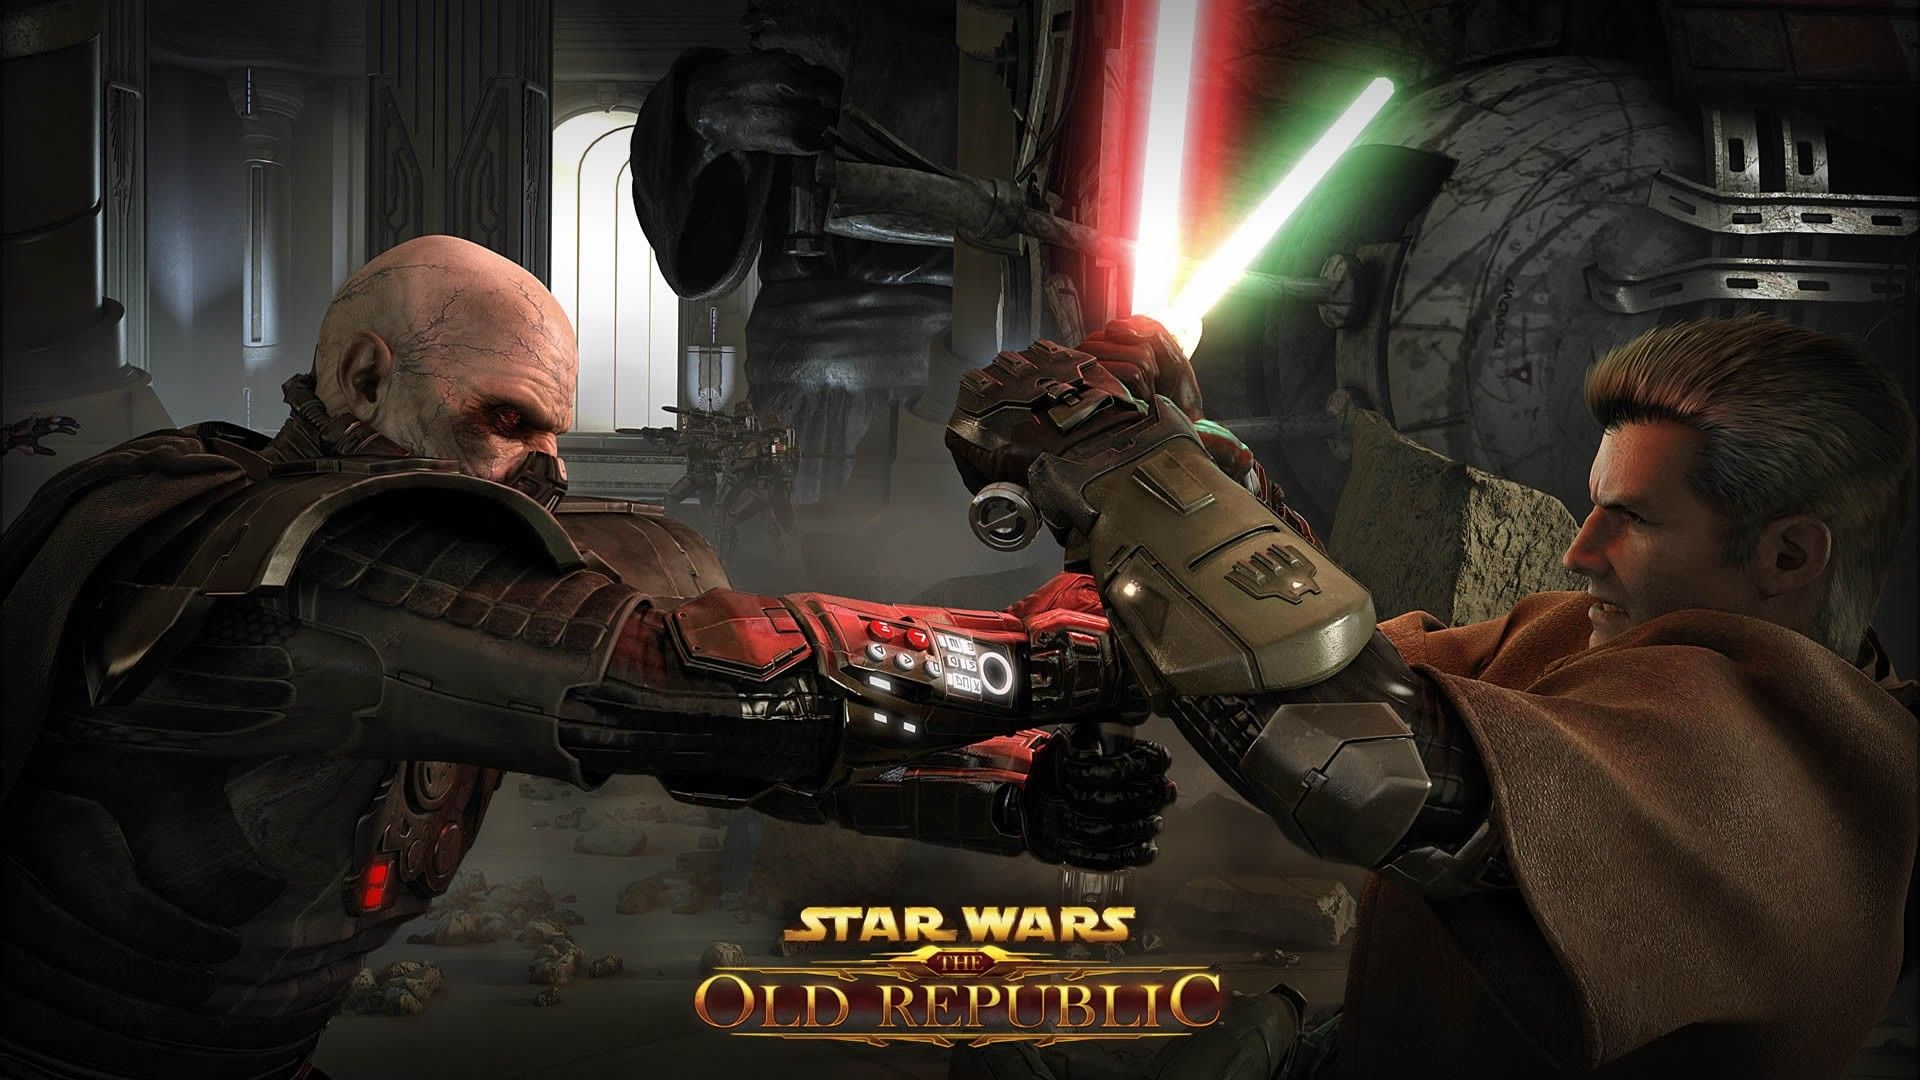 Wallpaper, Star Wars, weapon, soldier, Sith, machine, combat, Star Wars The Old Republic, darkness, games, screenshot, 1920x1080 px, computer wallpaper, pc game, action film, mercenary, video game software 1920x1080